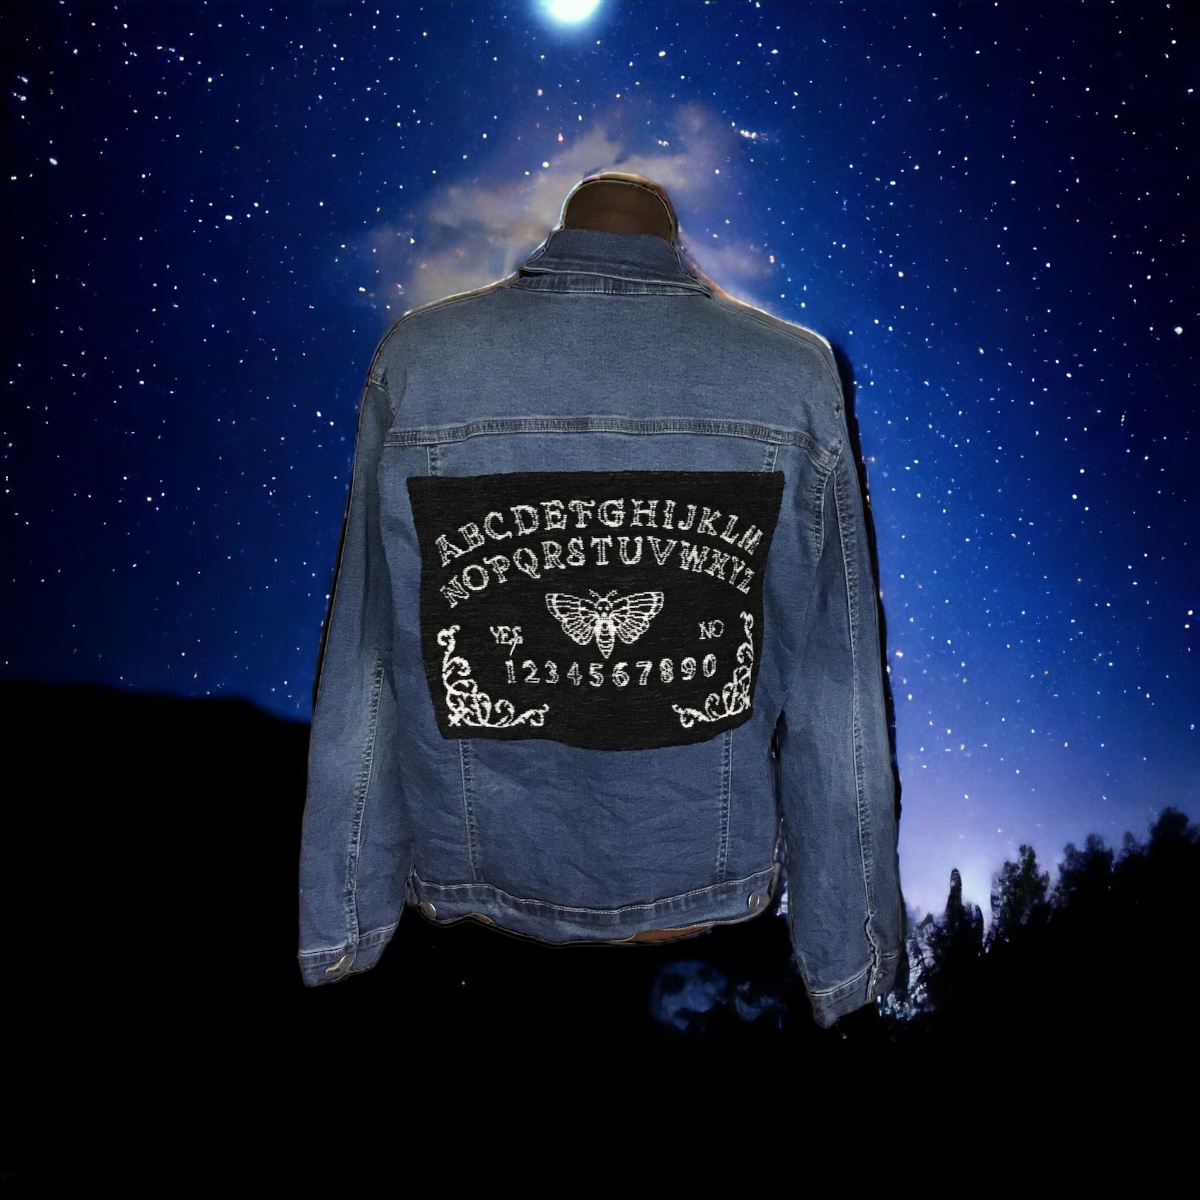 A denim jacket with a moon and stars on it.